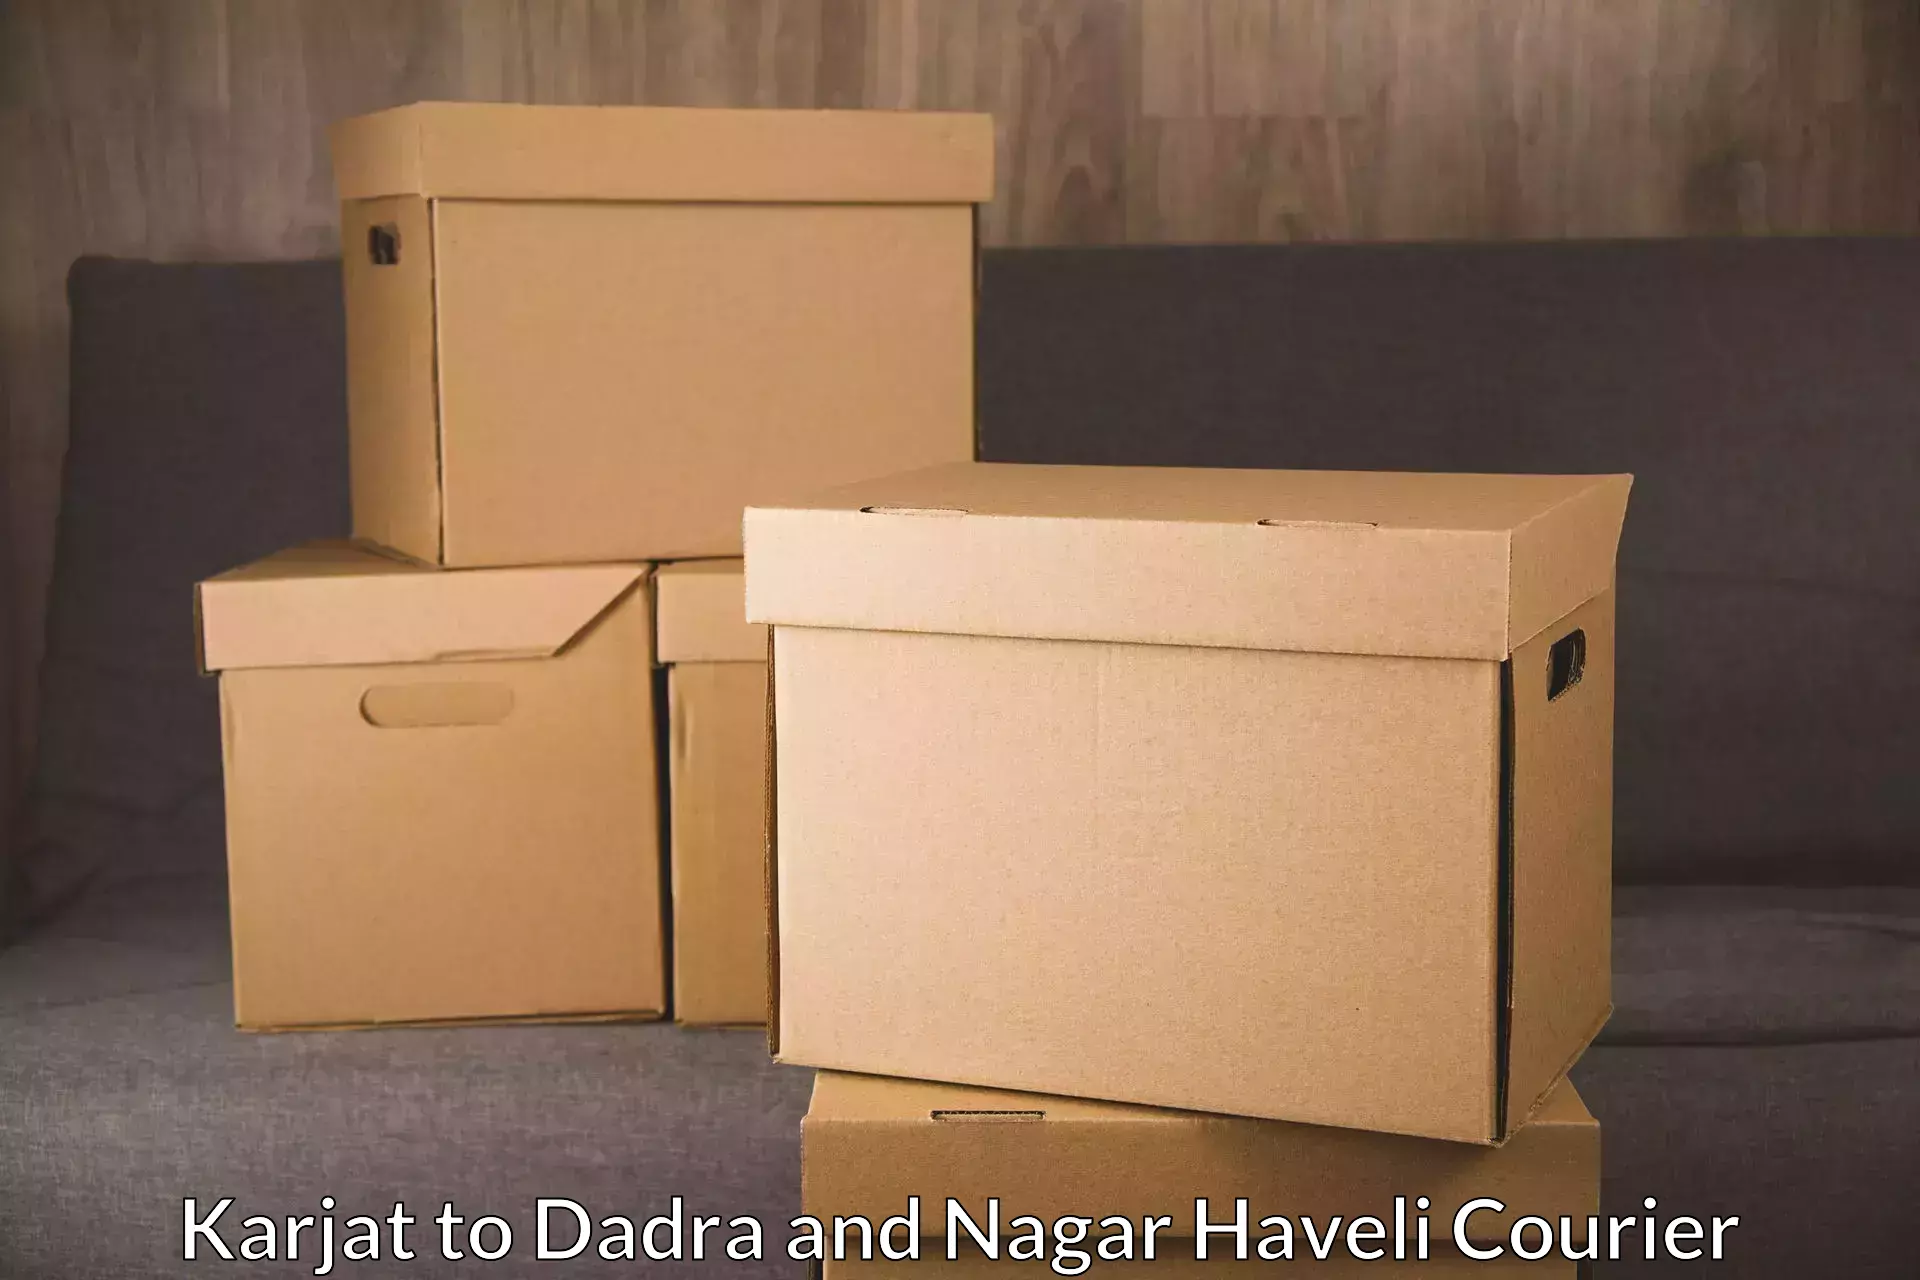 Customized delivery options Karjat to Dadra and Nagar Haveli